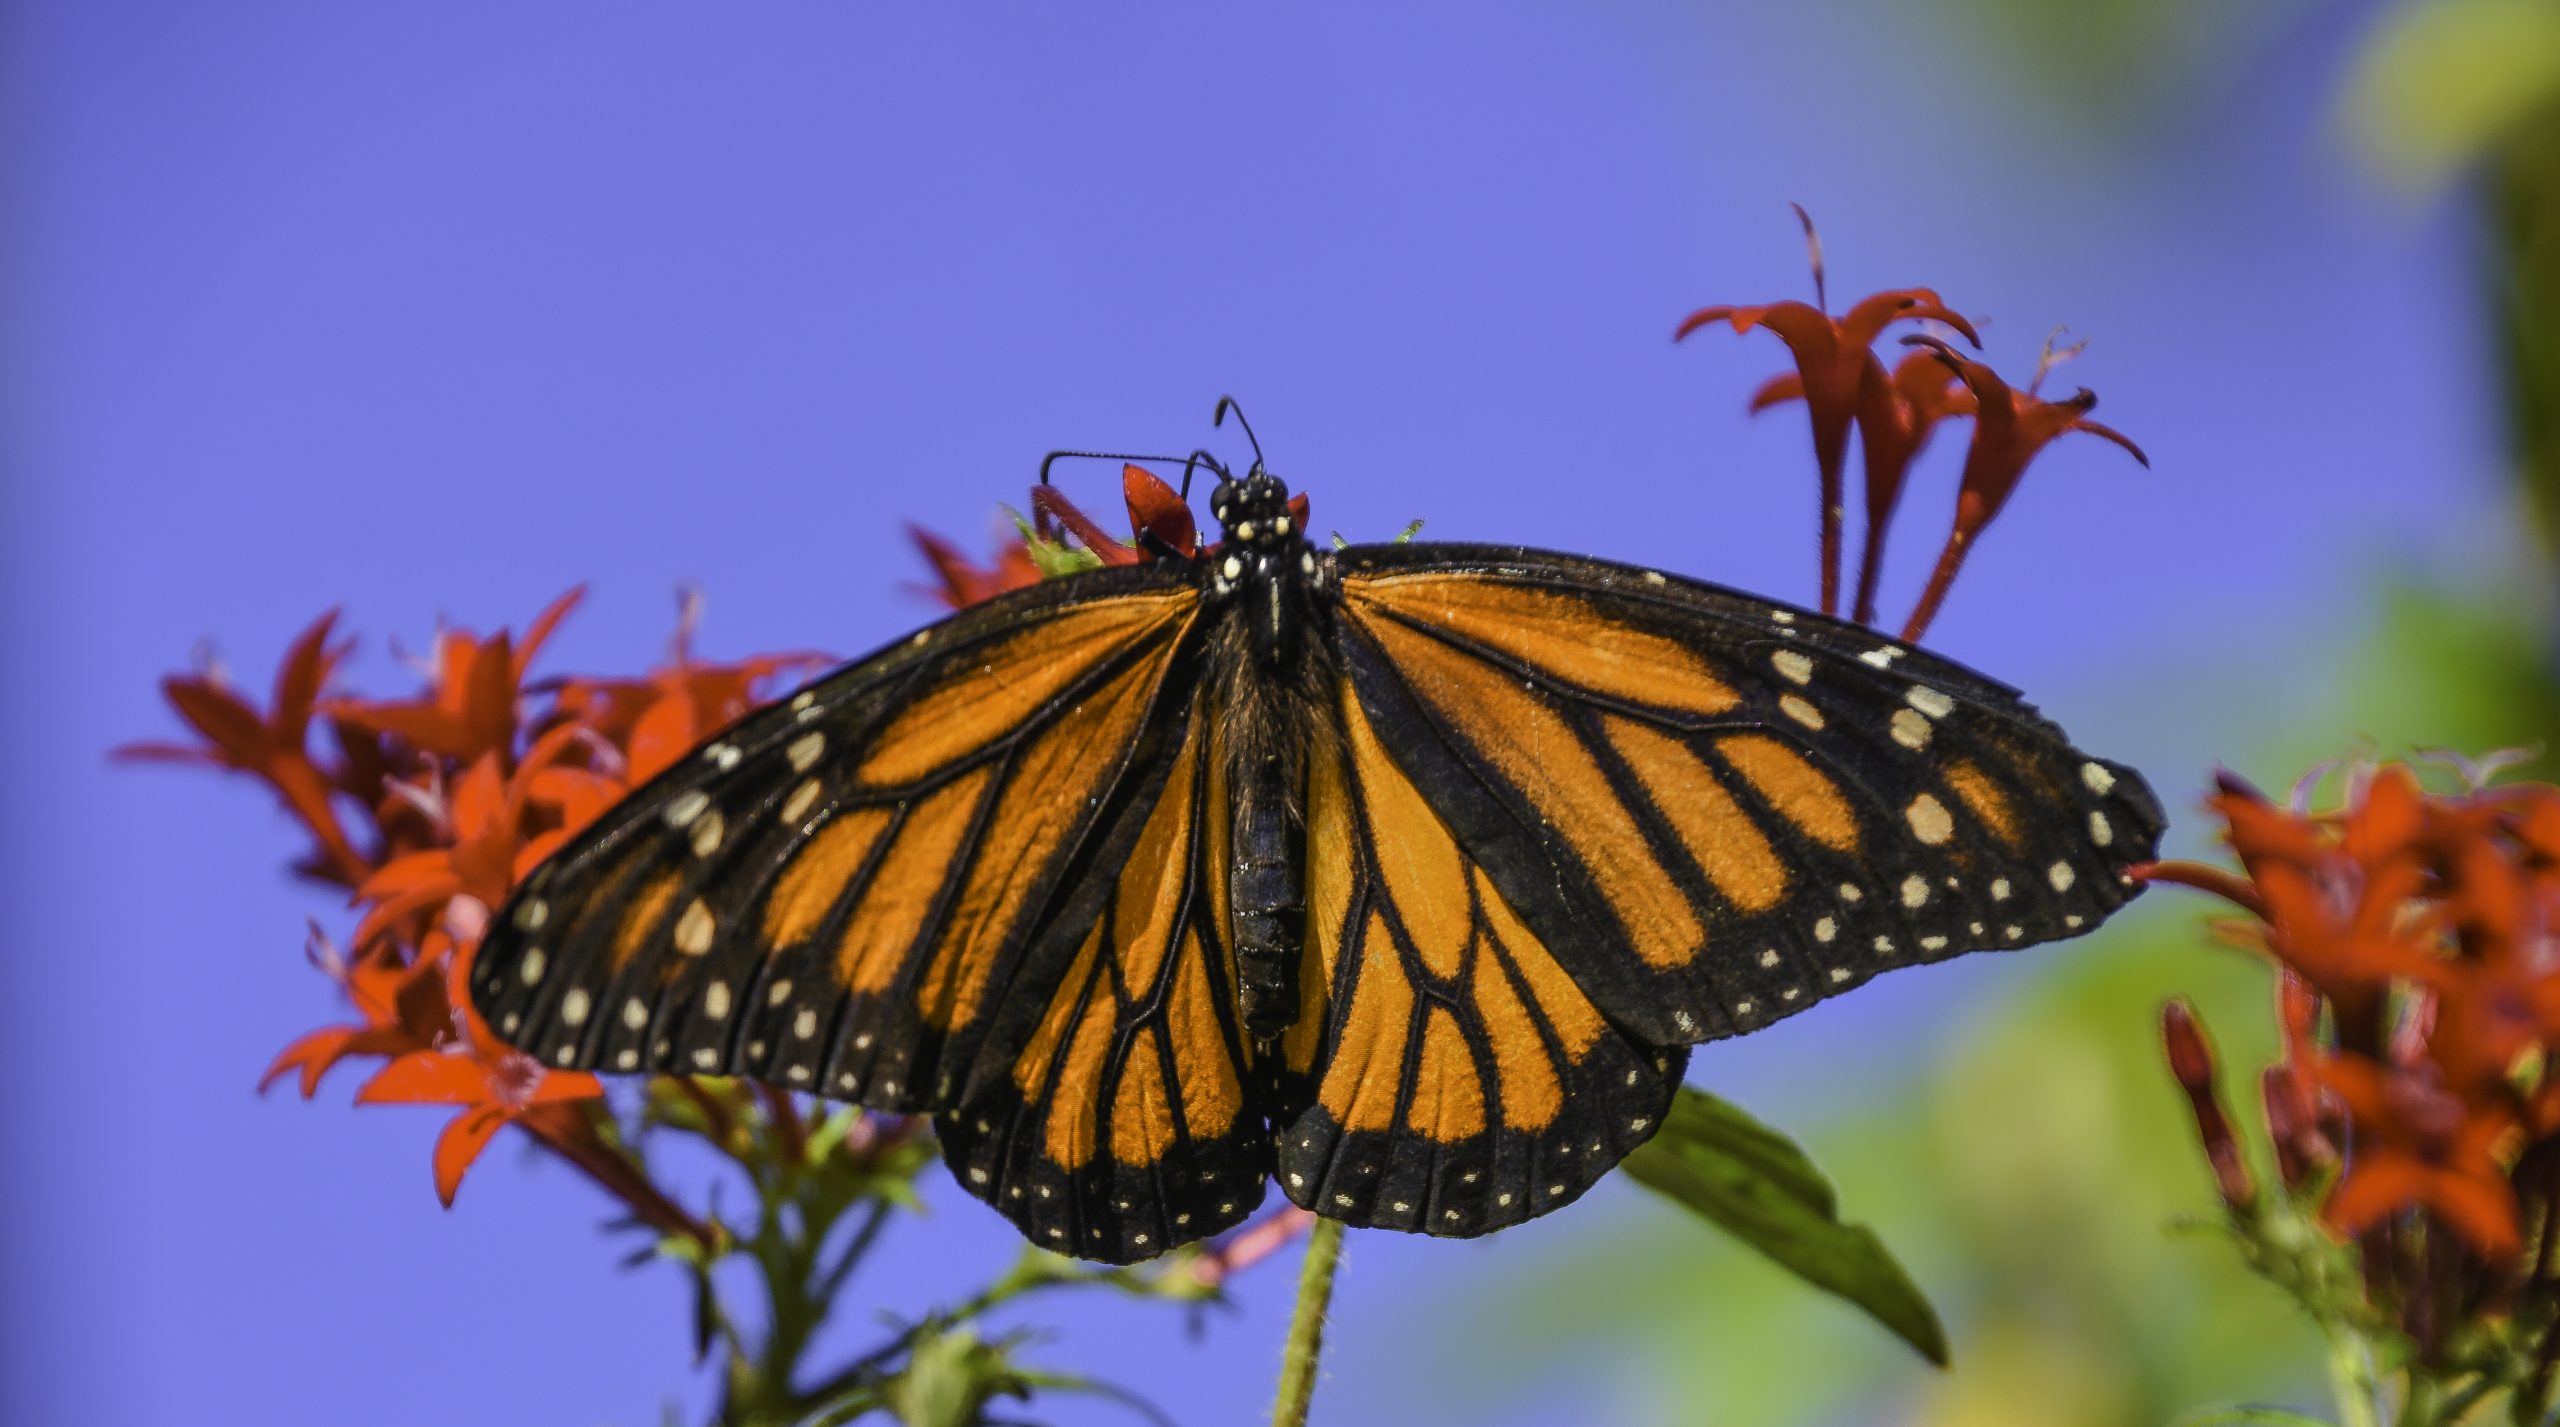 A monarch butterfly sits on a plant with small, red flowers. Its wings are open, and its black and orange colors are in stark contrast to the vibrant blue of the sky behind it.